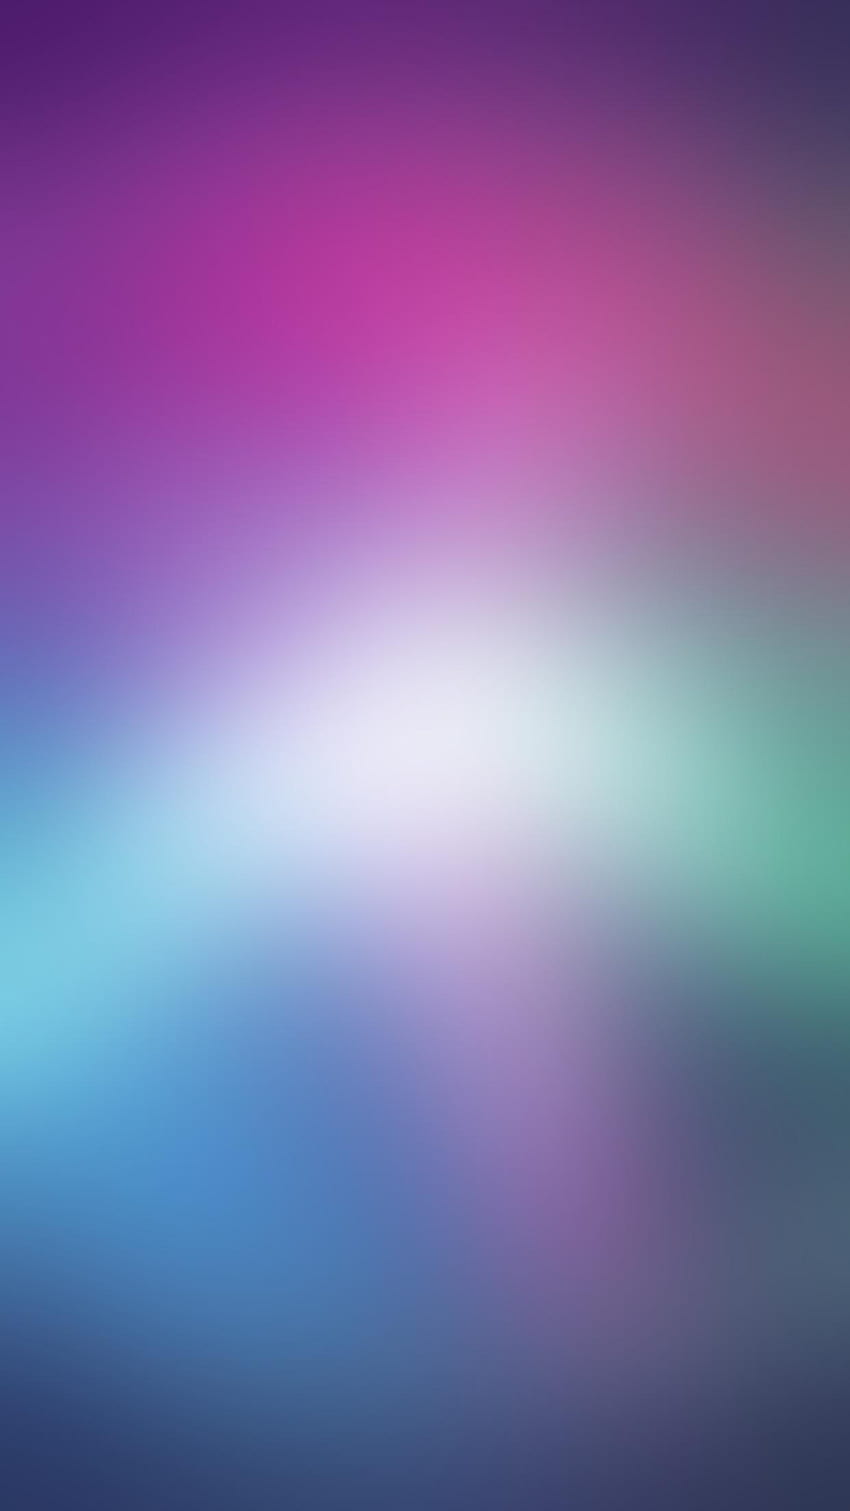 Here's a Siri gradient I made from iOS 11 : iphone HD phone wallpaper